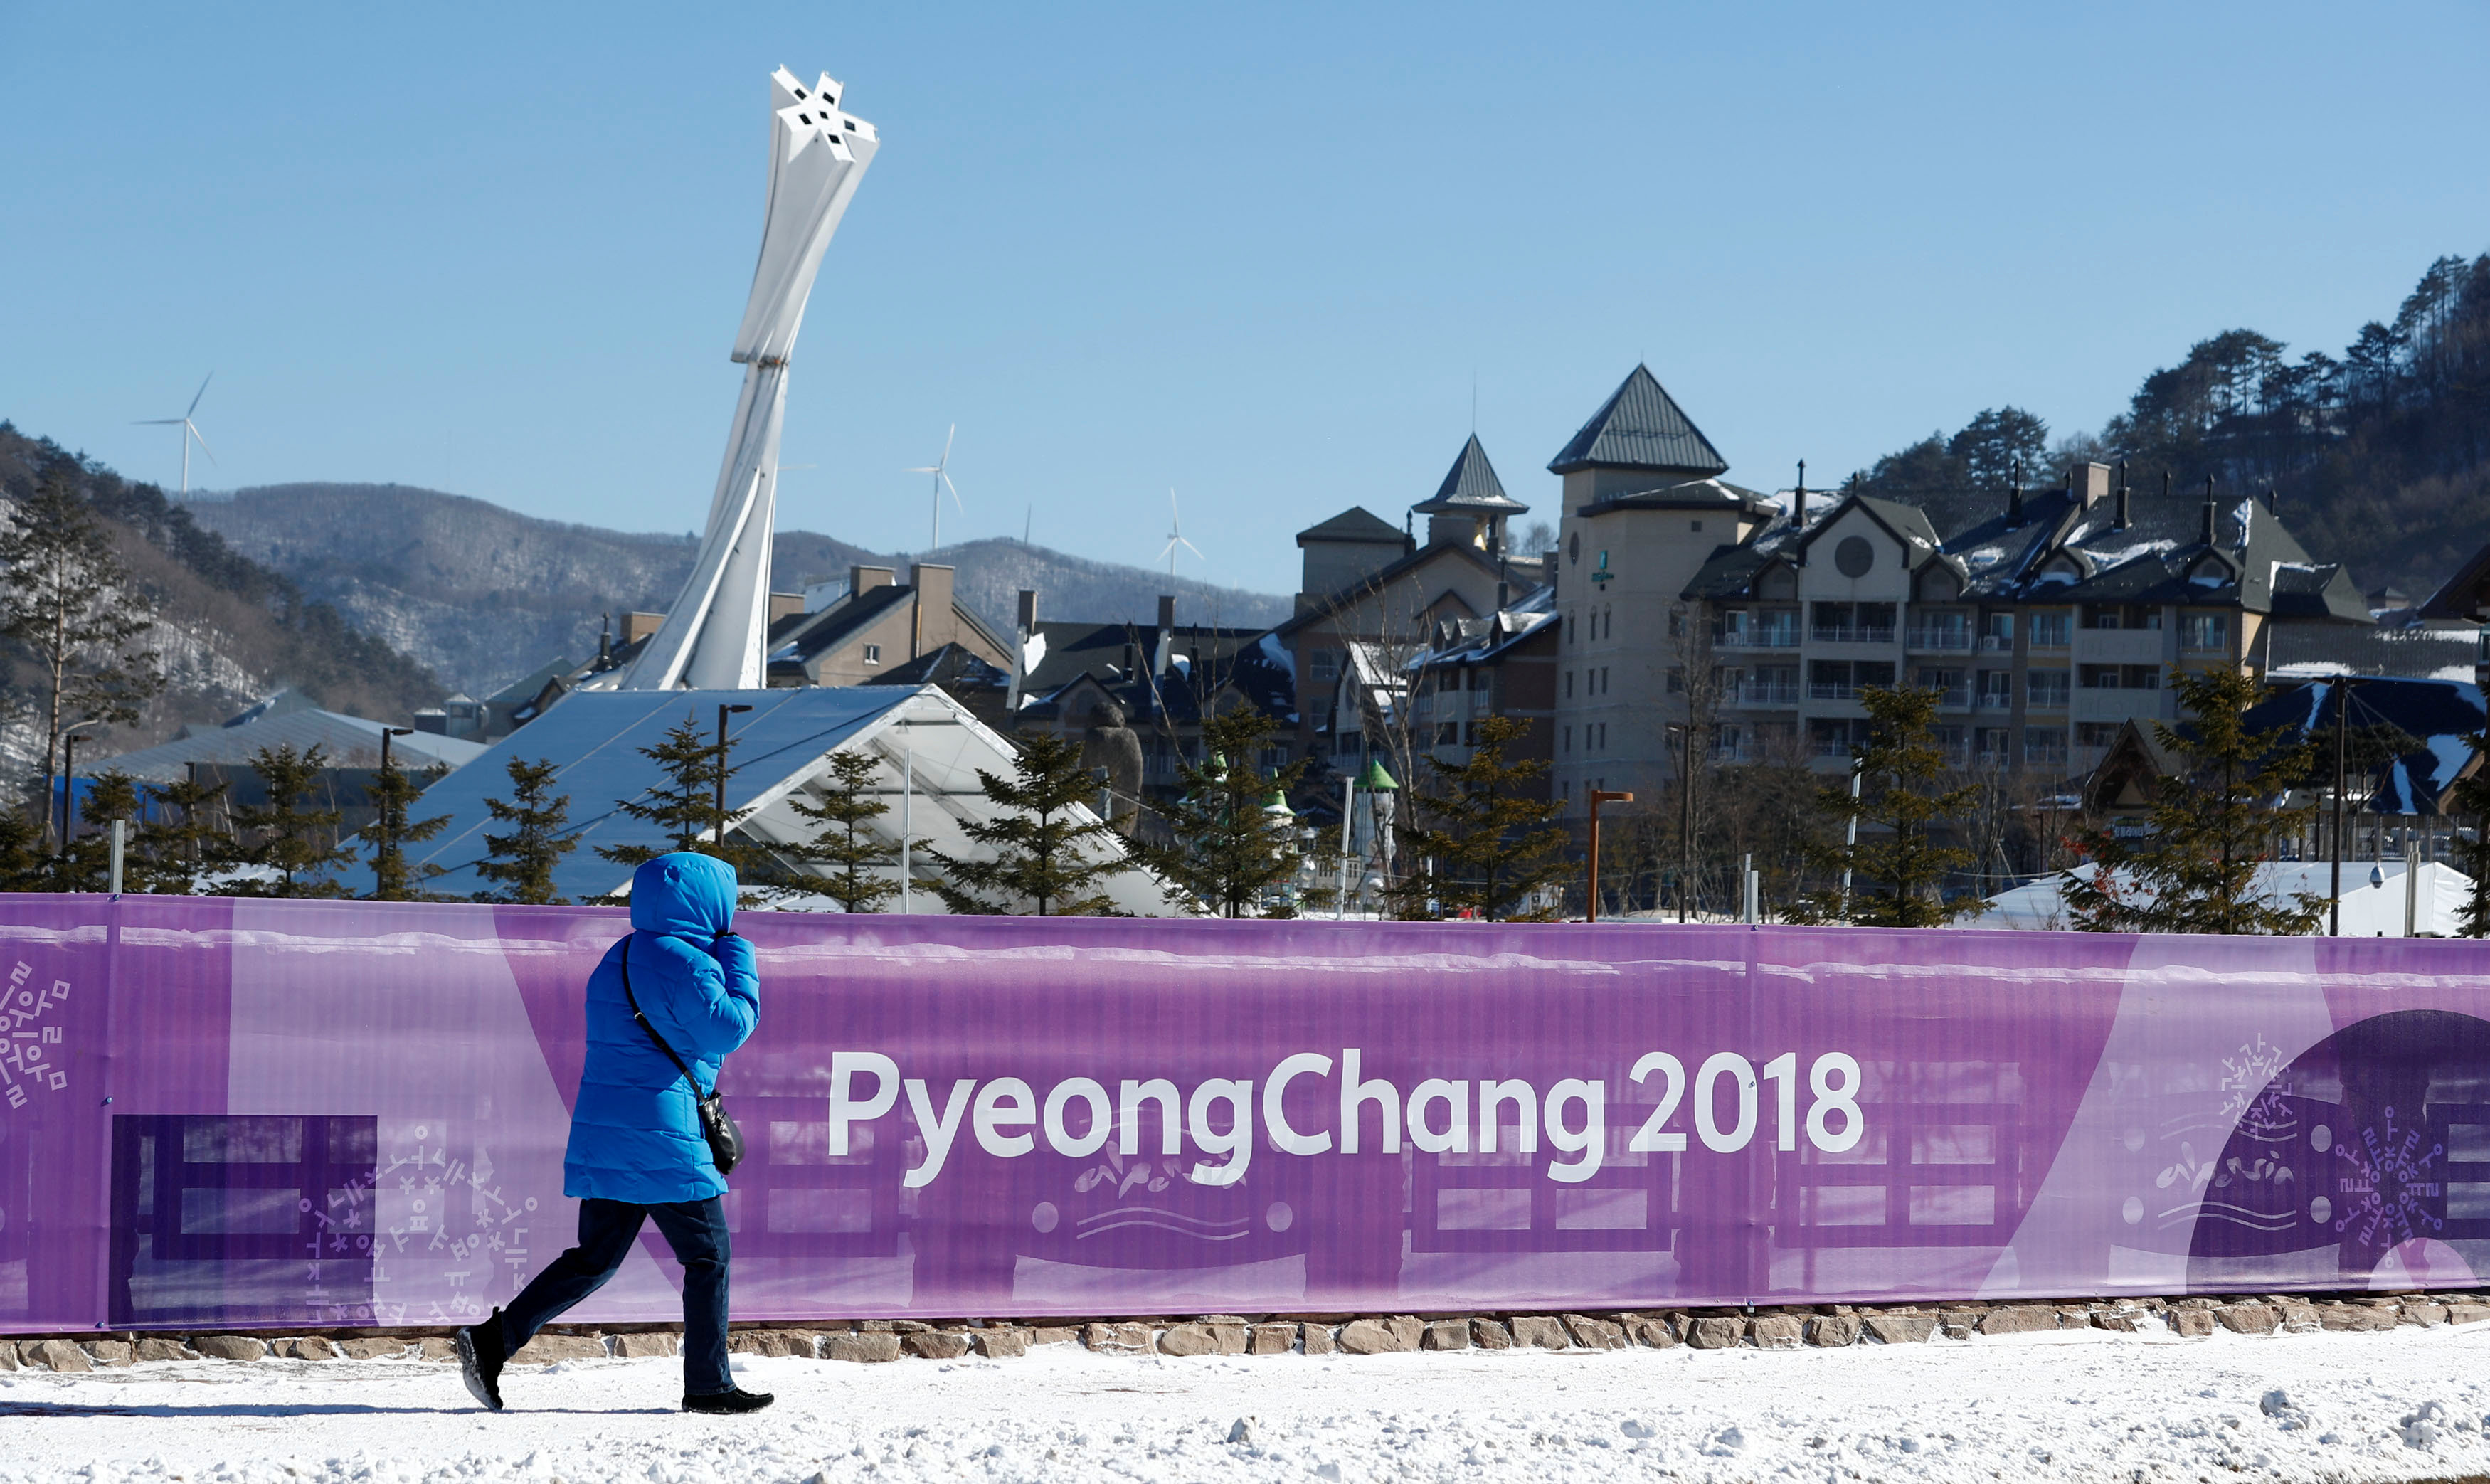 The Alpensia resort in Pyeongchang (by Reuters)